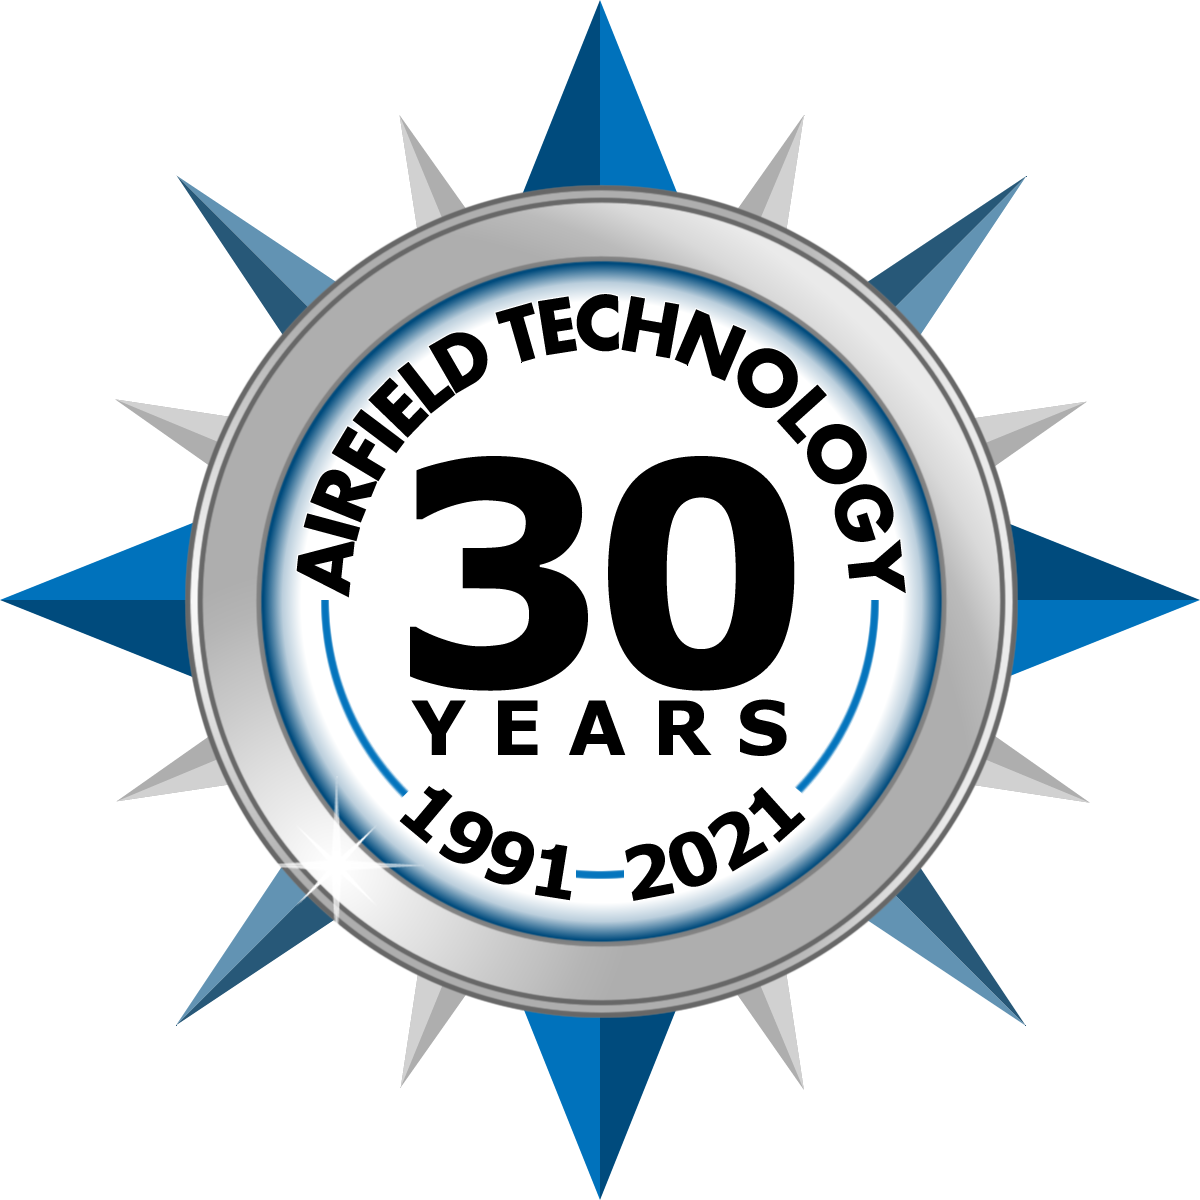 Airfield Technology, Inc. Celebrating 30 Years (2021)